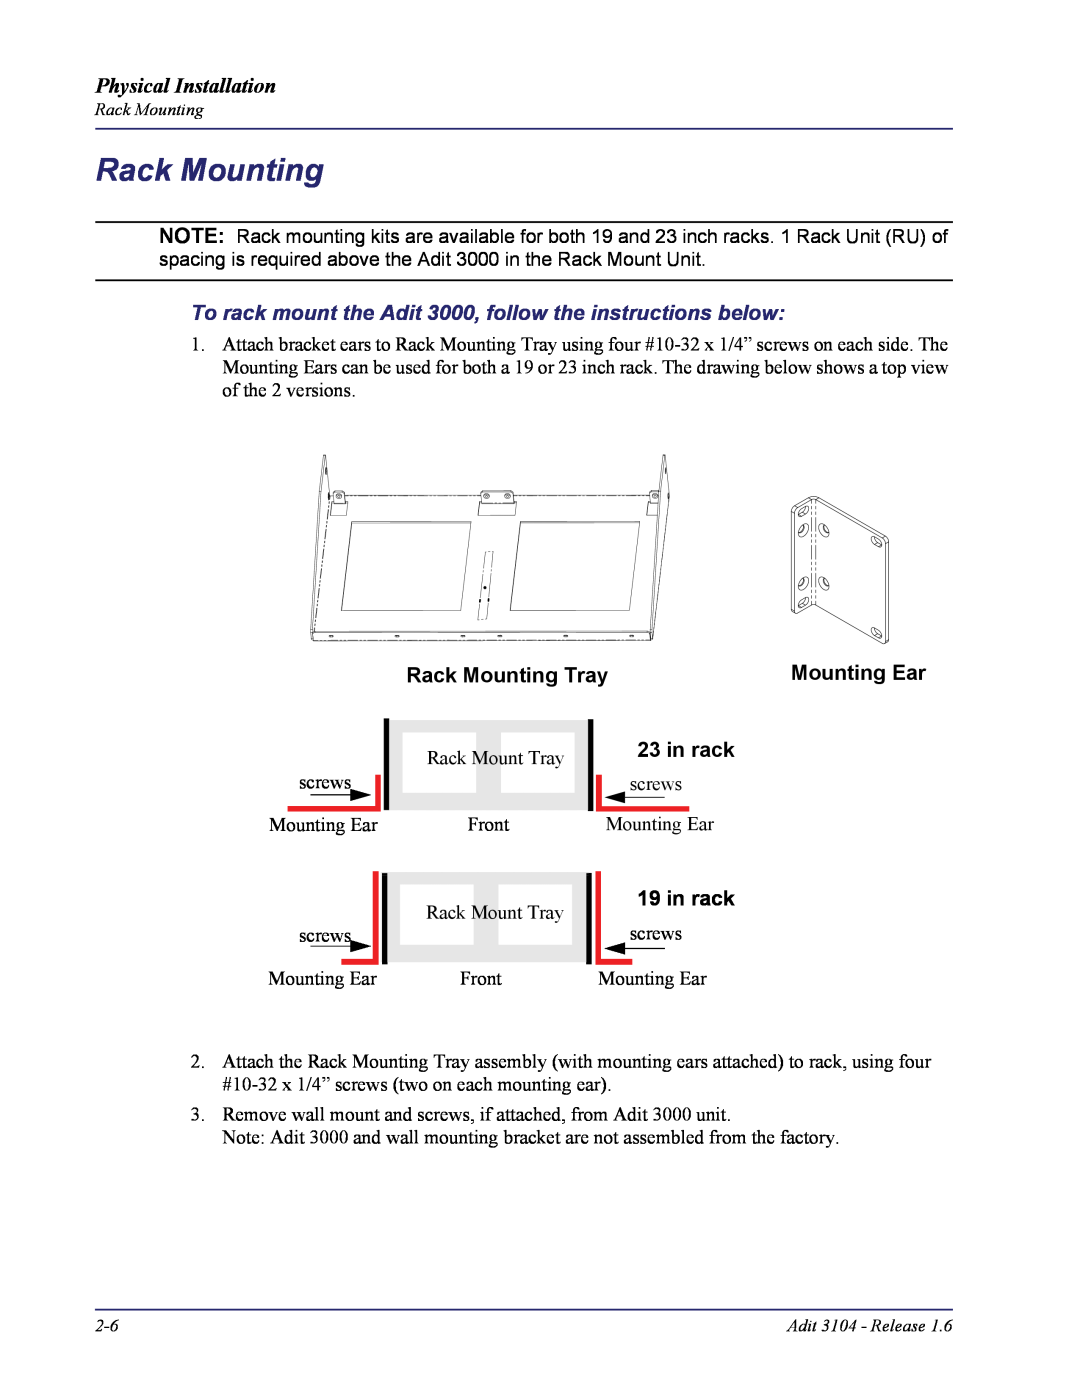 Carrier Access Adit 3104 To rack mount the Adit 3000, follow the instructions below, Rack Mounting Tray, Mounting Ear 